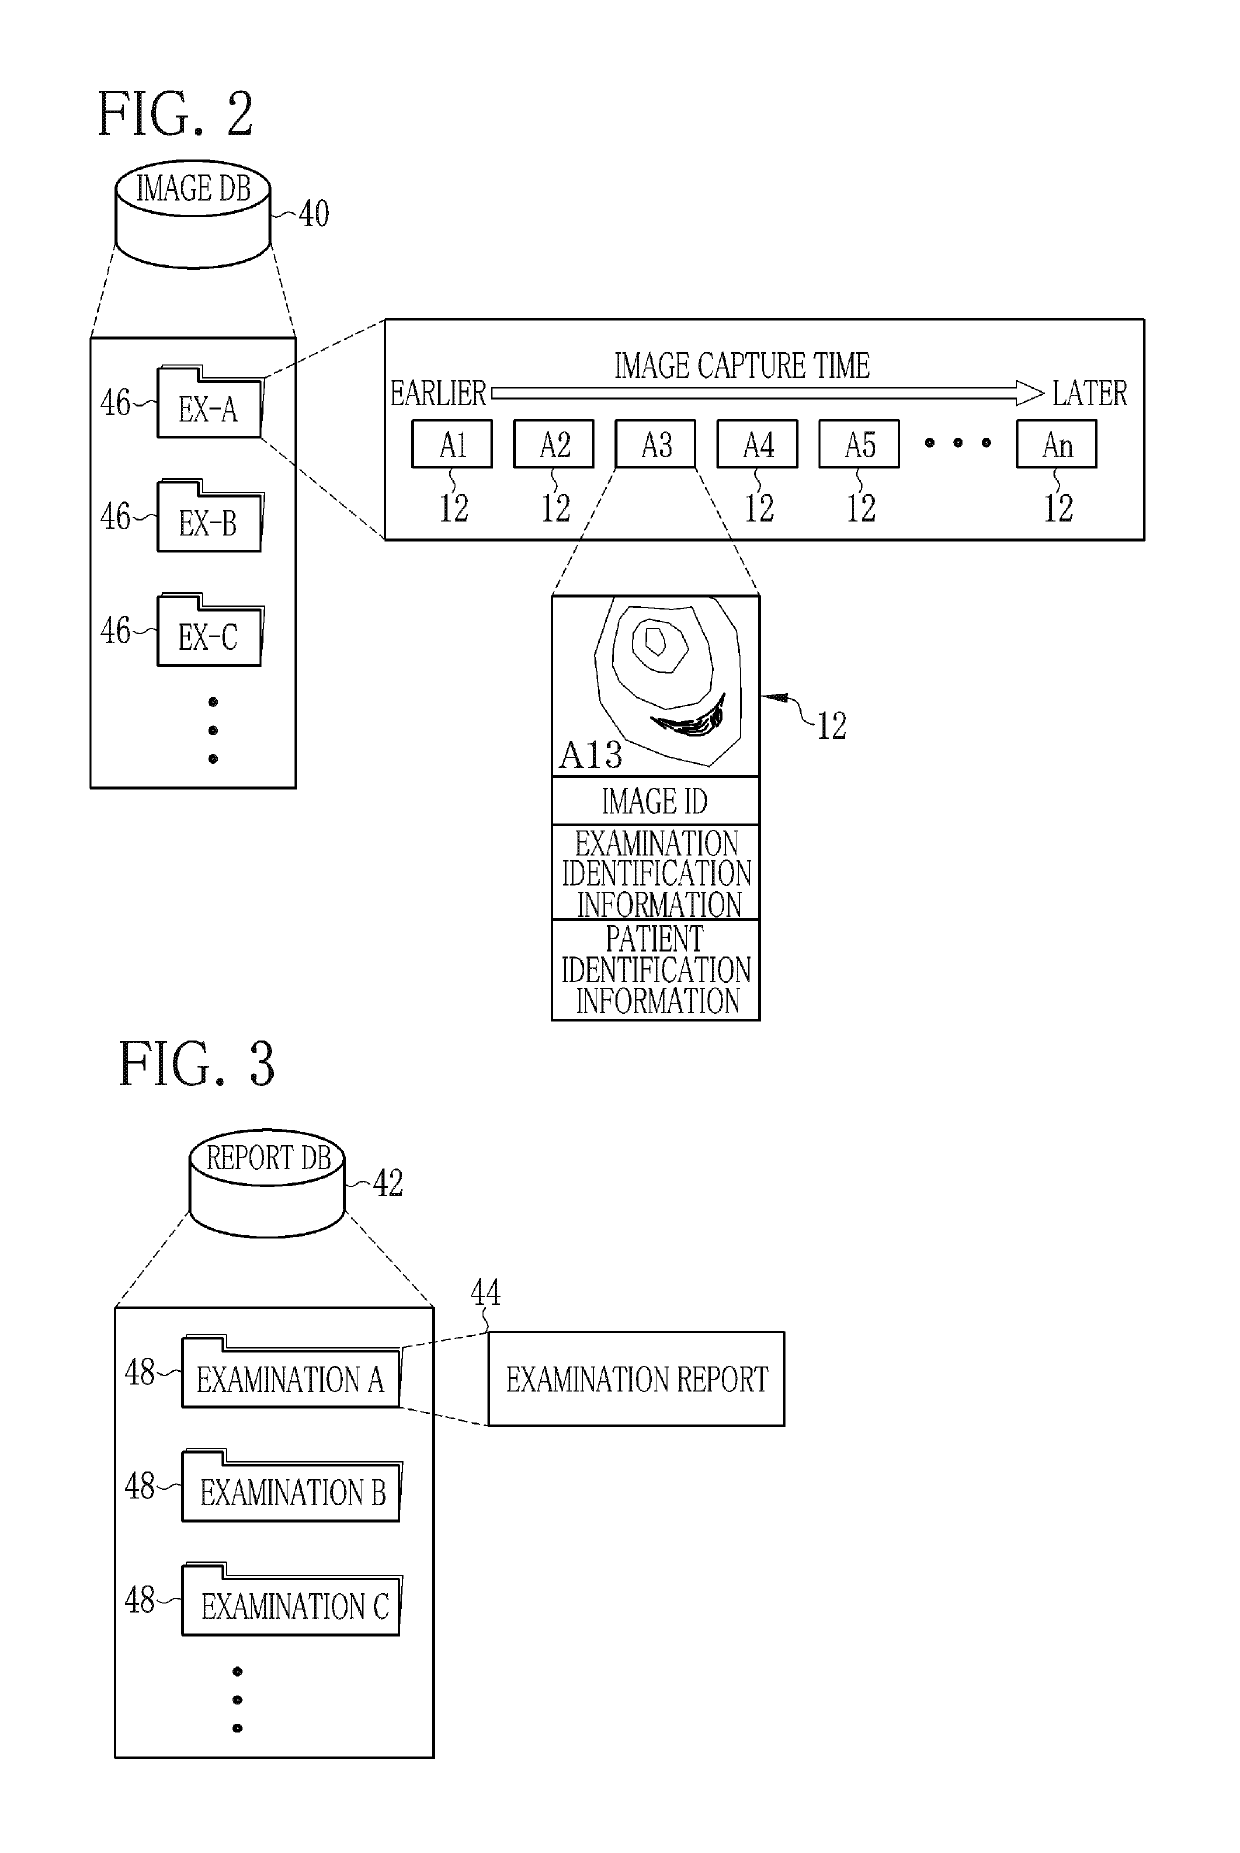 Apparatus, method, and non-transitory computer-readable medium for supporting viewing examination images